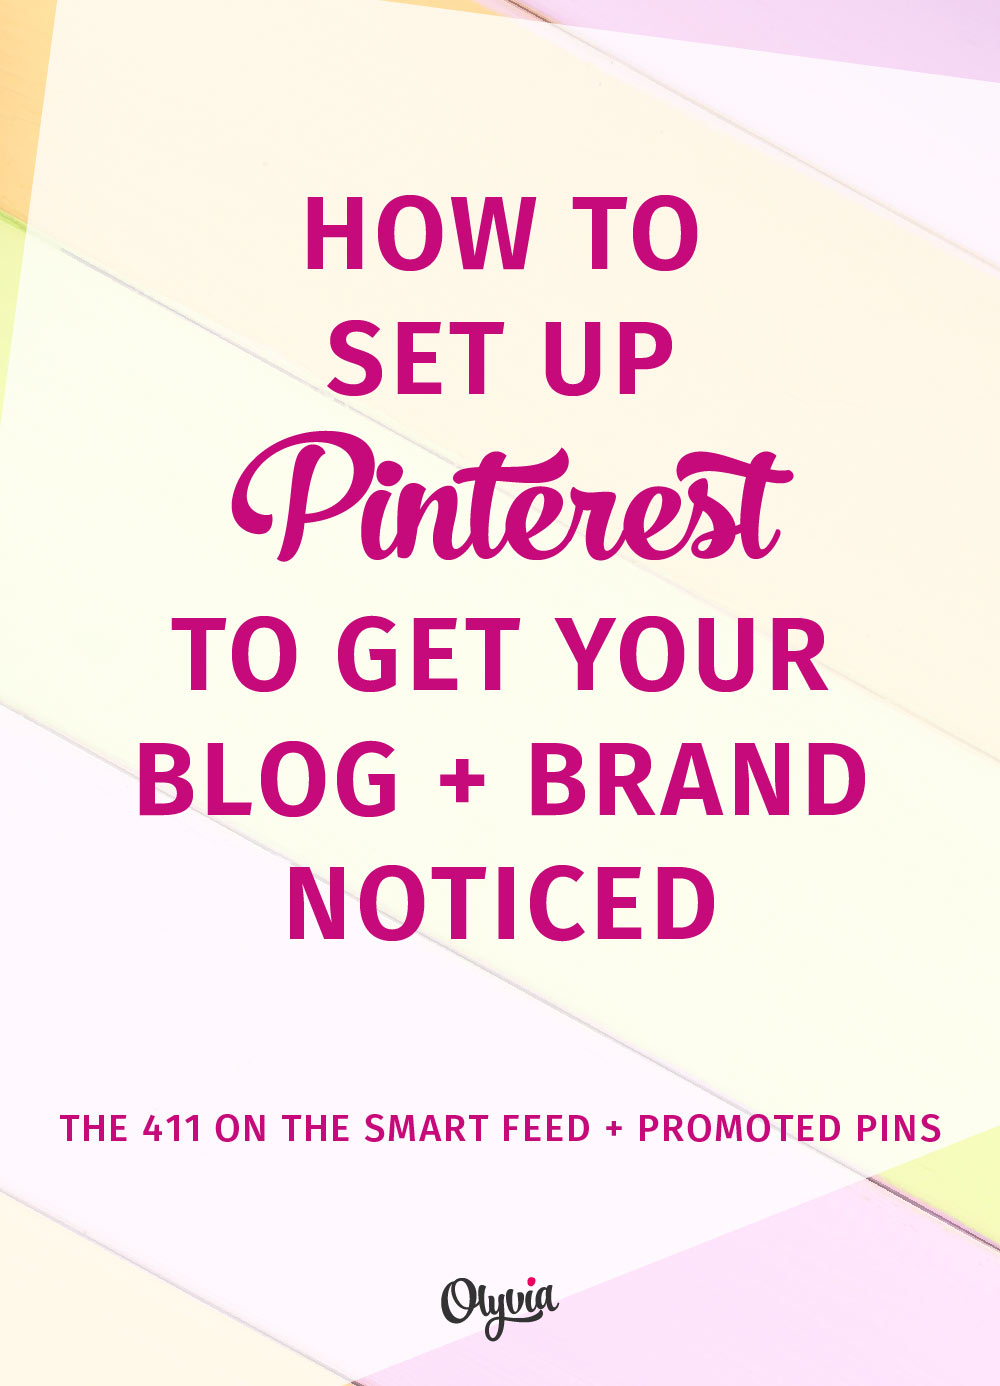 Simple, sleaze-free tips to getting noticed on Pinterest + a video tutorial and free worksheet download.